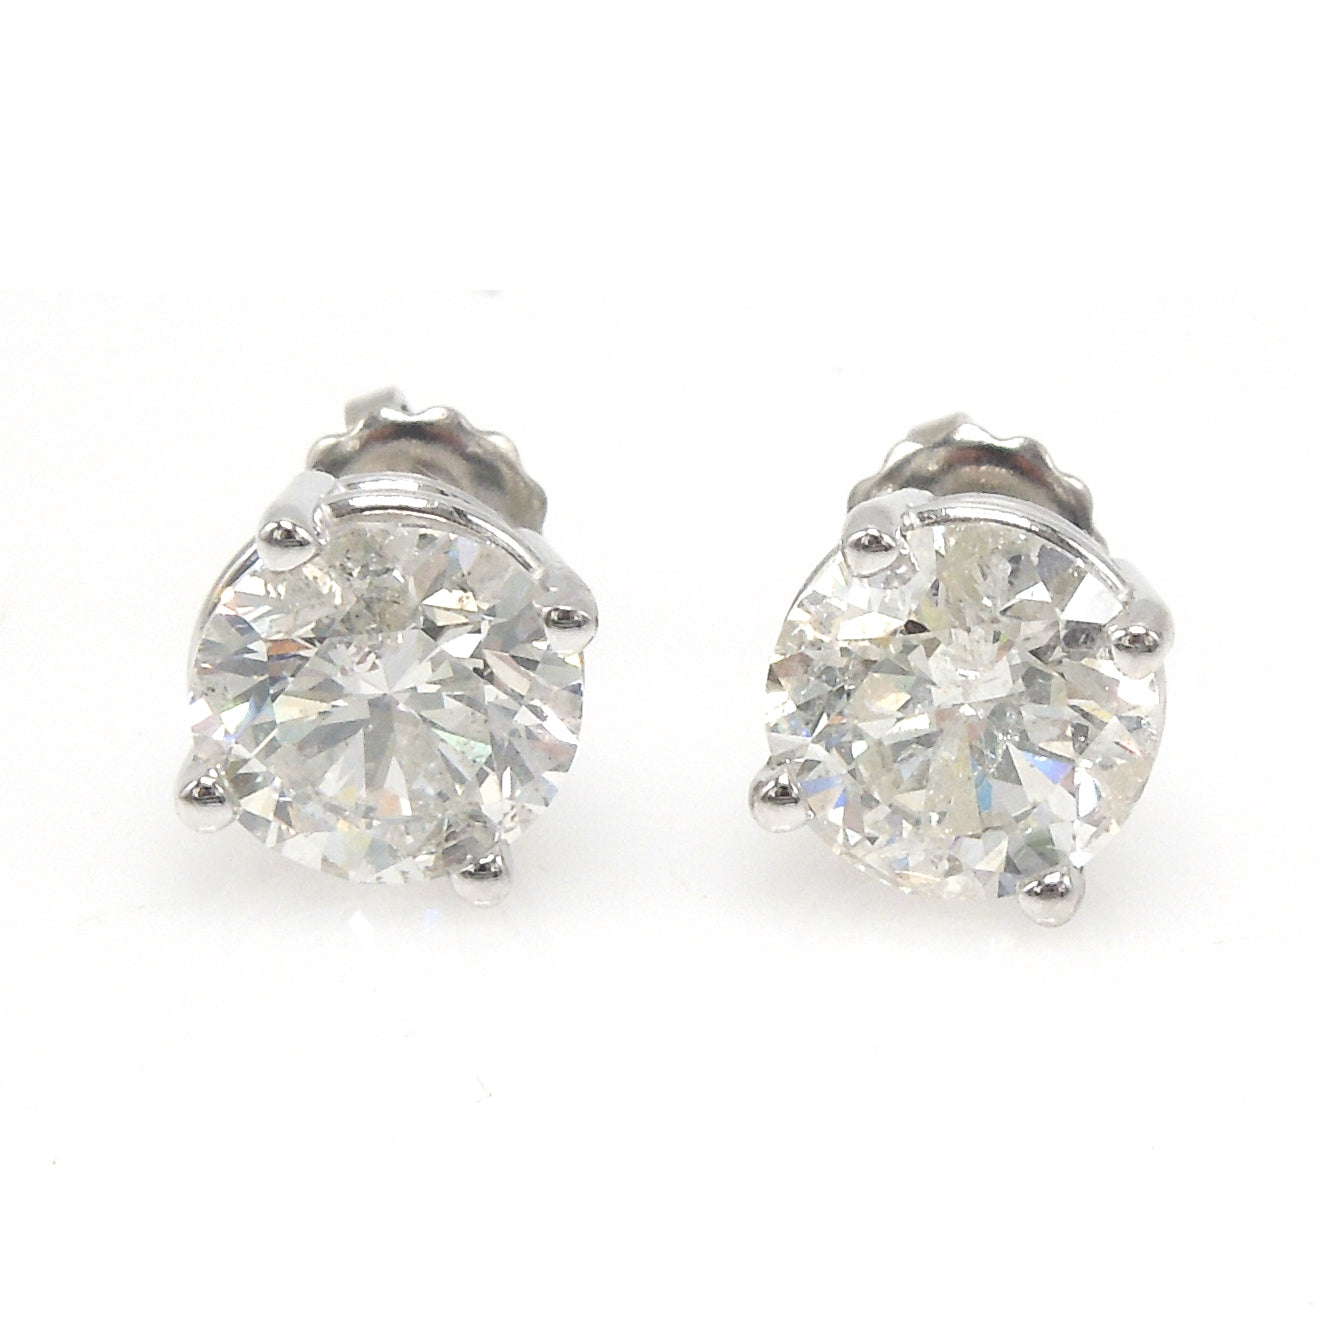 4.02ct Total Weight Diamond Stud Earrings in 14K White Gold Basket Setting